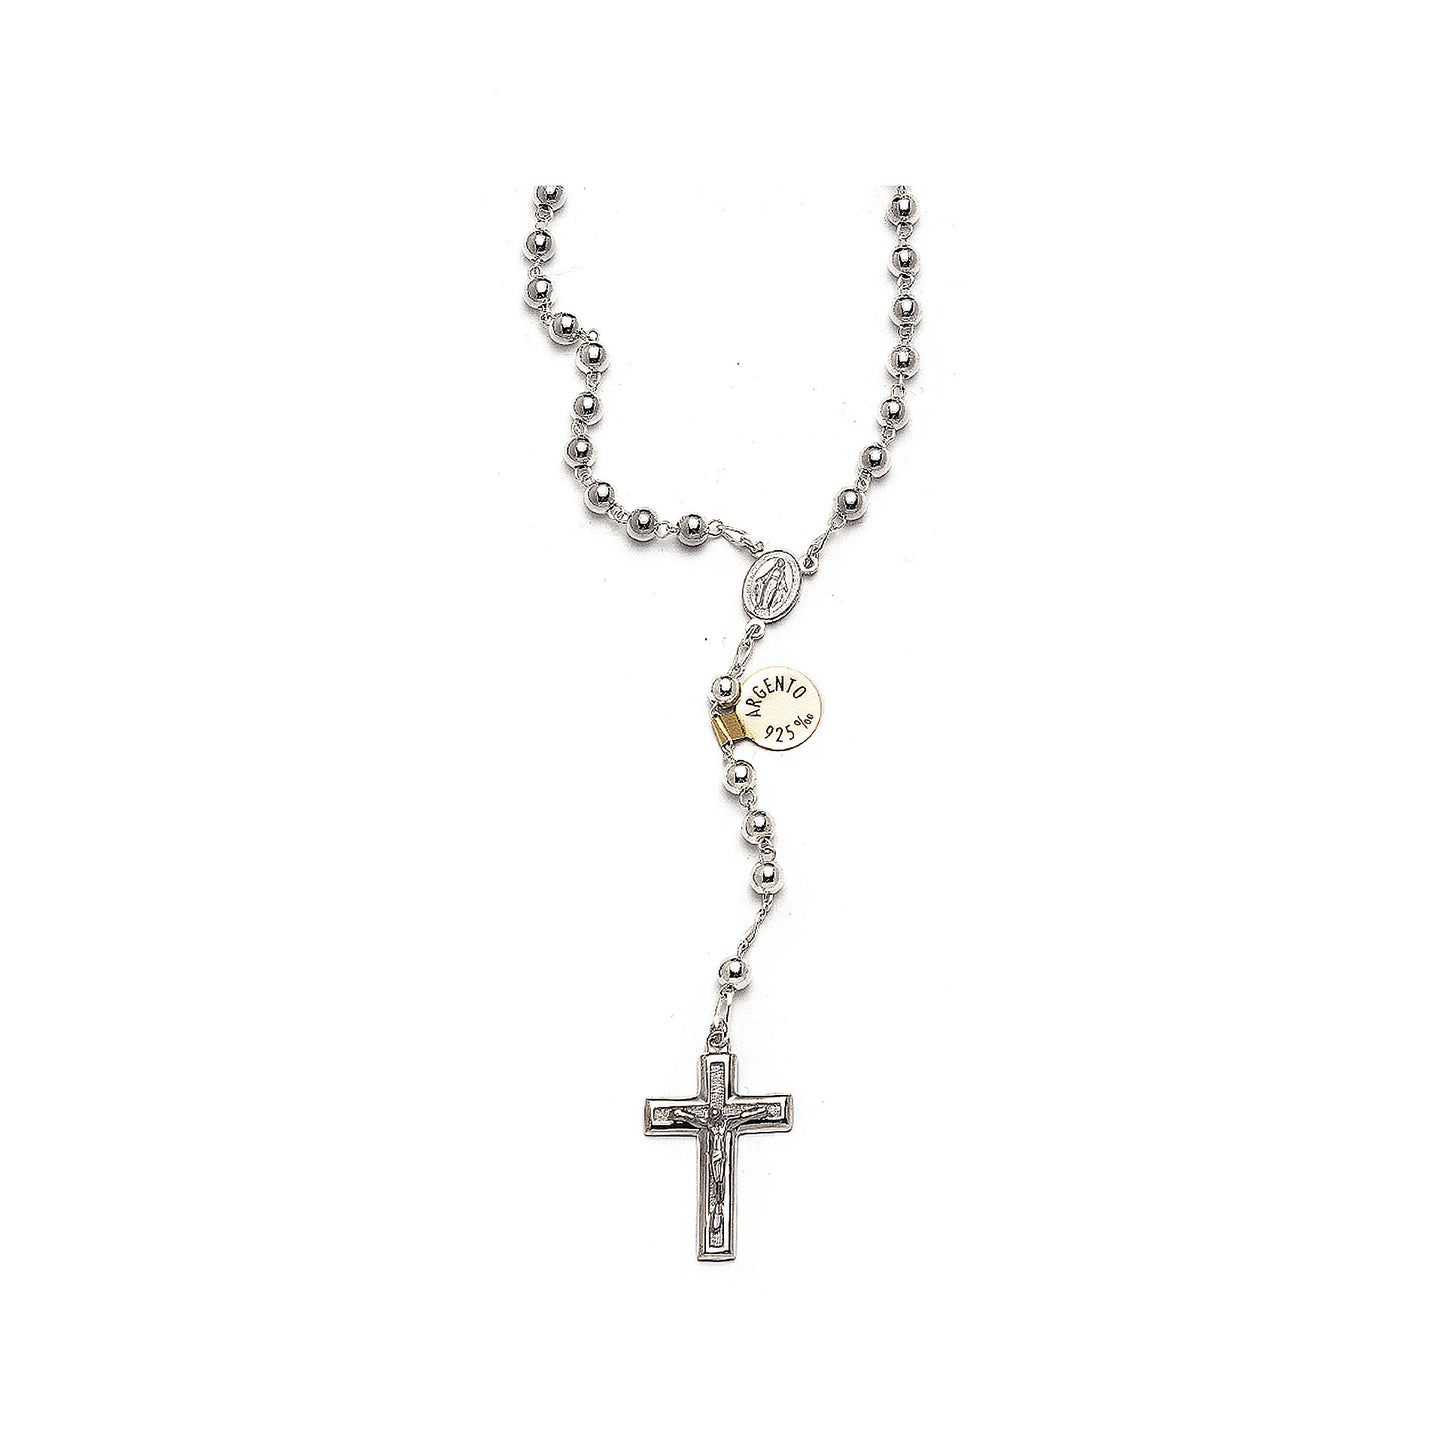 Silver 925 round rosary + closure, size 4 mm. 18 inches Necklace